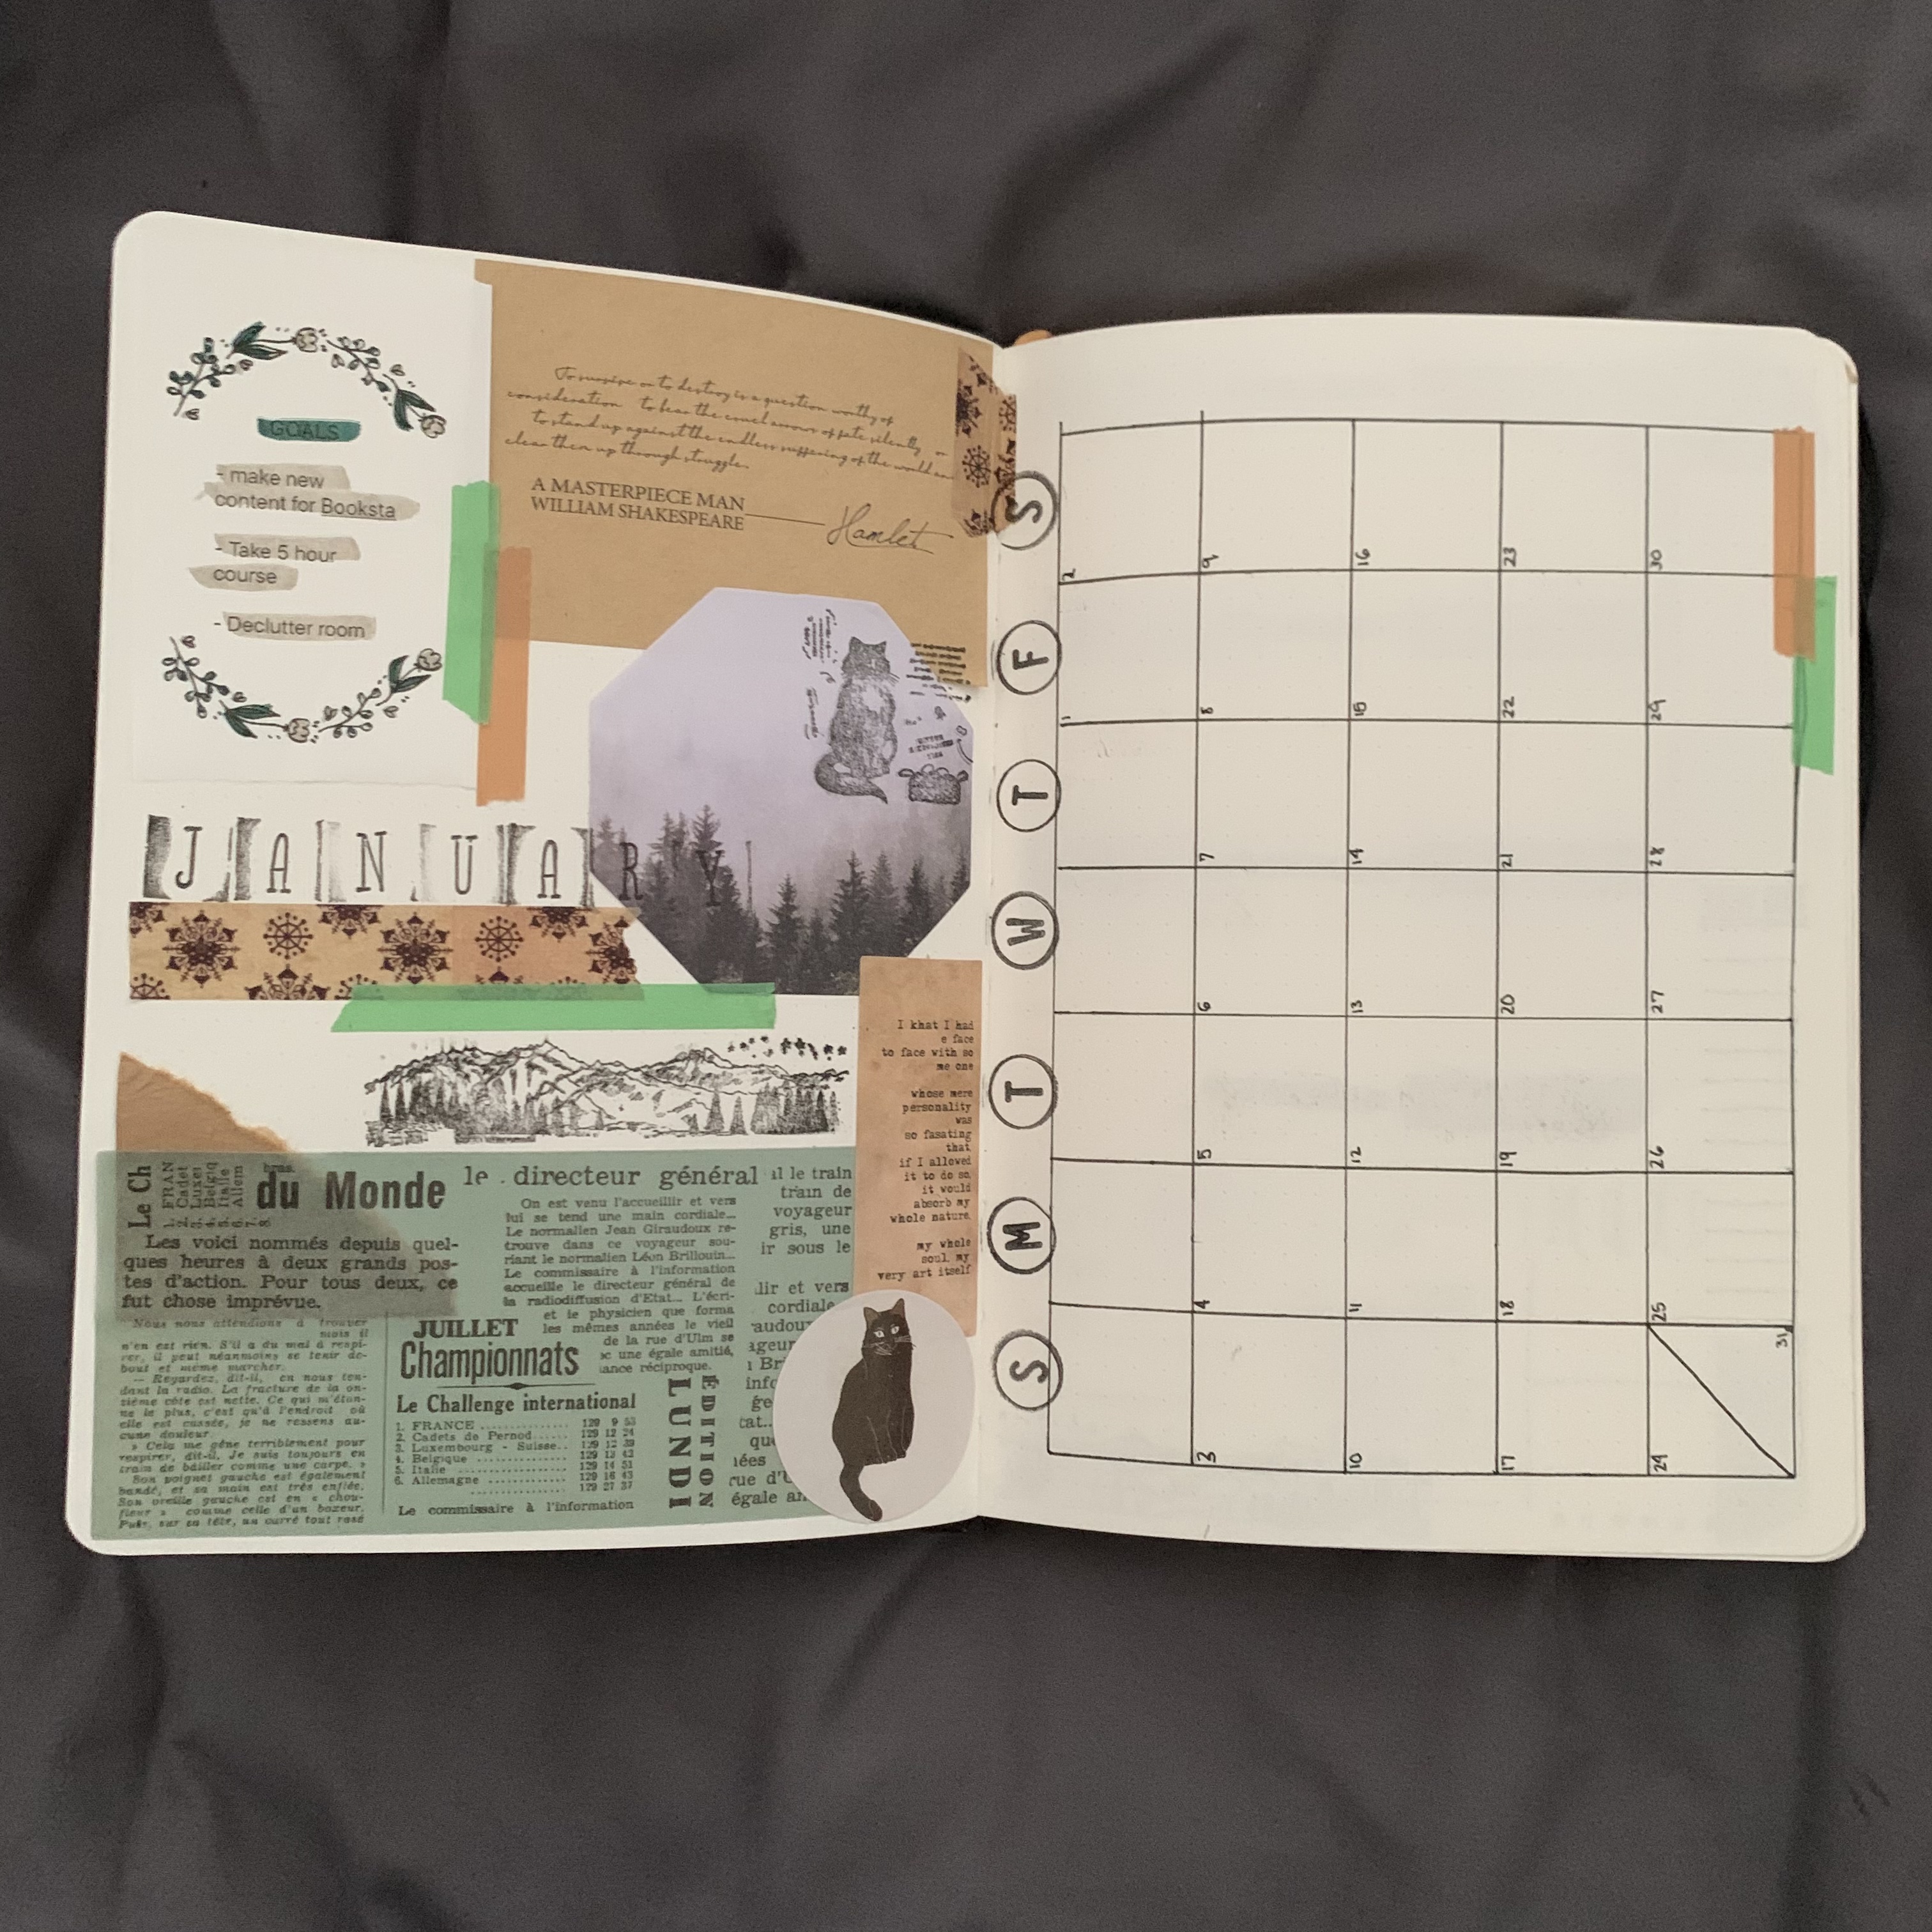 January 2021 Bullet Journal Set-Up – My Day Is Booked